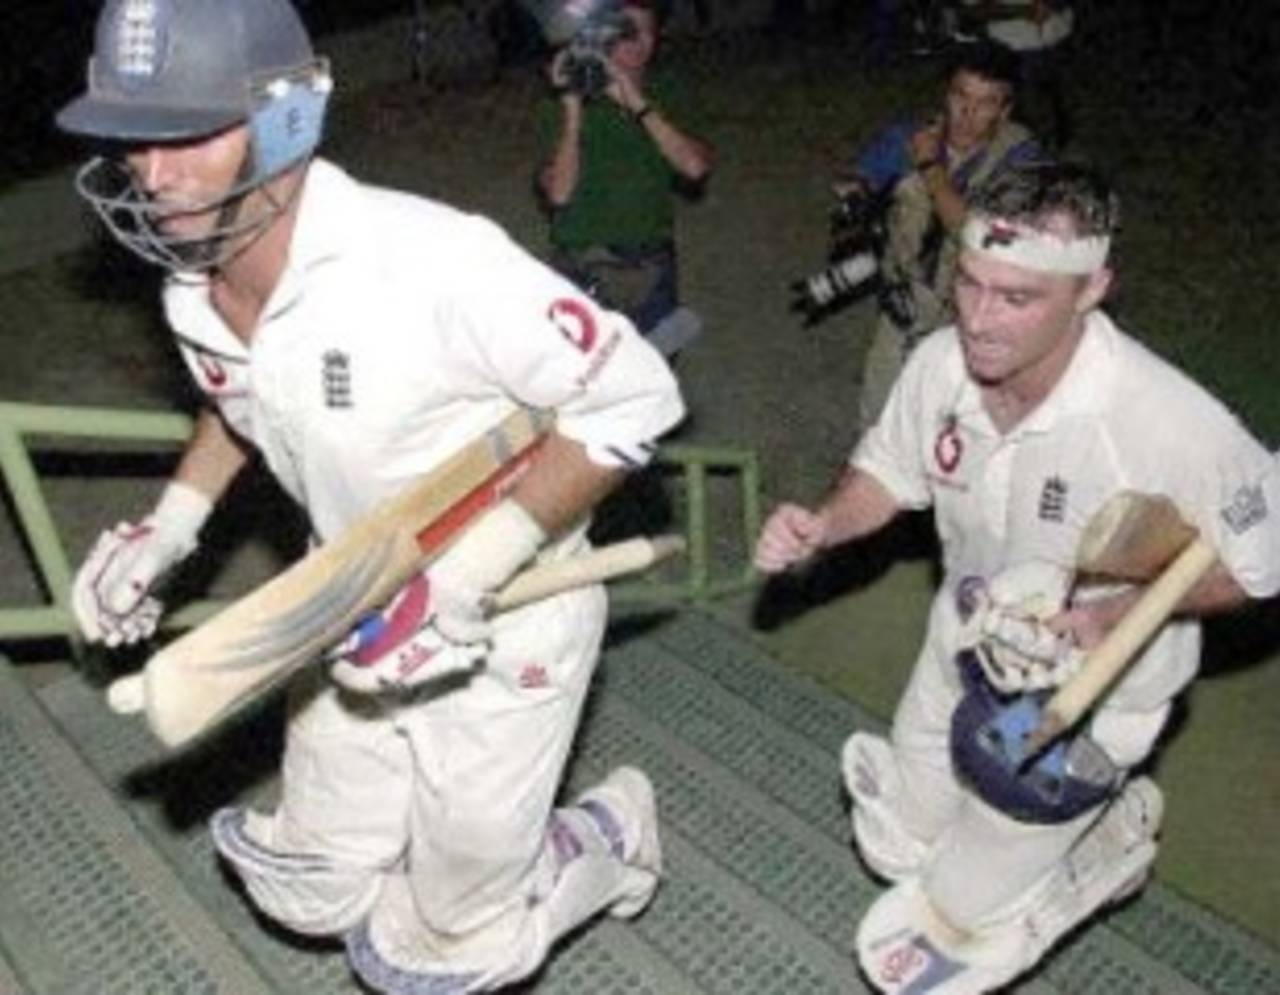 England captain Nasser Hussain (L) and Graham Thorpe (R) rush to the English dressing room after their nail bitting victory by six wickets against Pakistan on the last day of the third cricket Test match at the National Stadium in Karachi, 11 December 2000. England clinched a historic series victory, snatching a stunning win with just minutes to spare in the third and final Test. England's six-wicket triumph makes them the first English side to win a Test in Pakistan since 1962 and end the hosts' unbeaten record in 34 encounters.